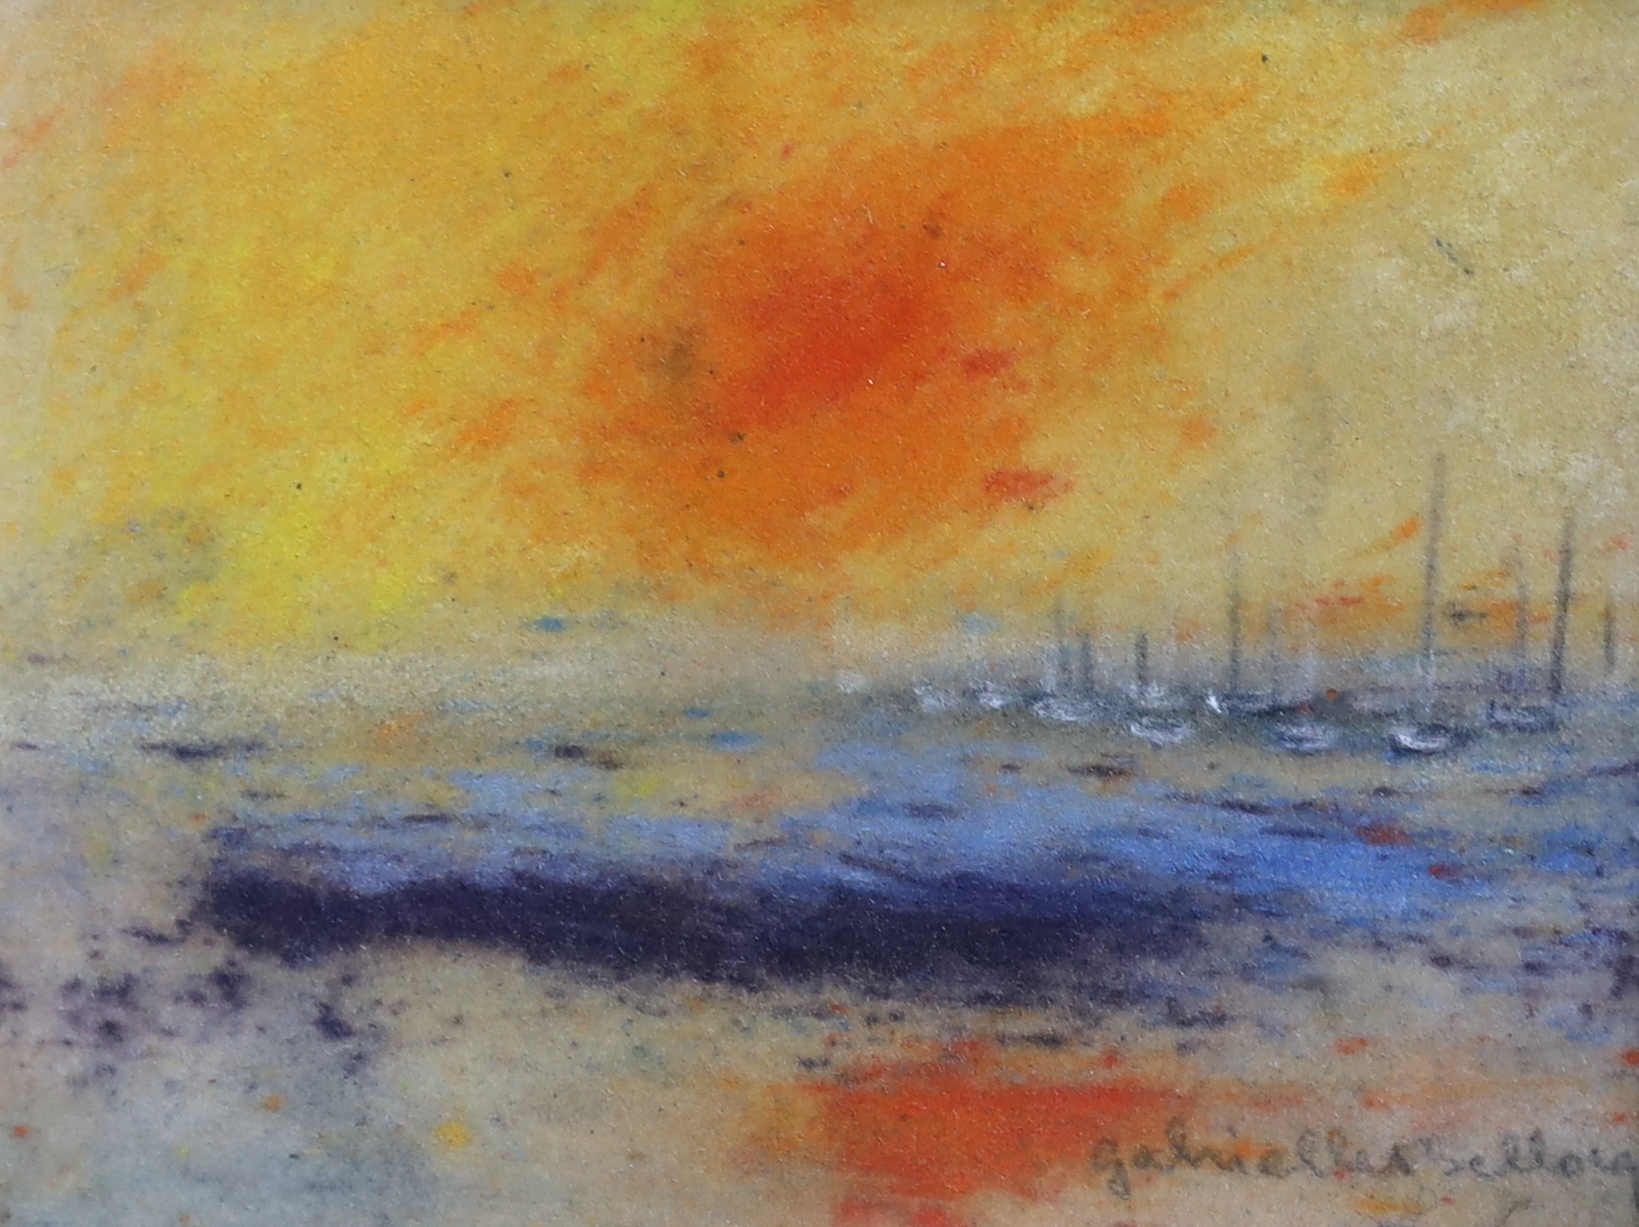 Gabriel Bellocq (French, 1920-1999), Orange Sky and Between Fields, pastel on paper, a pair, 11.5 x 15cm